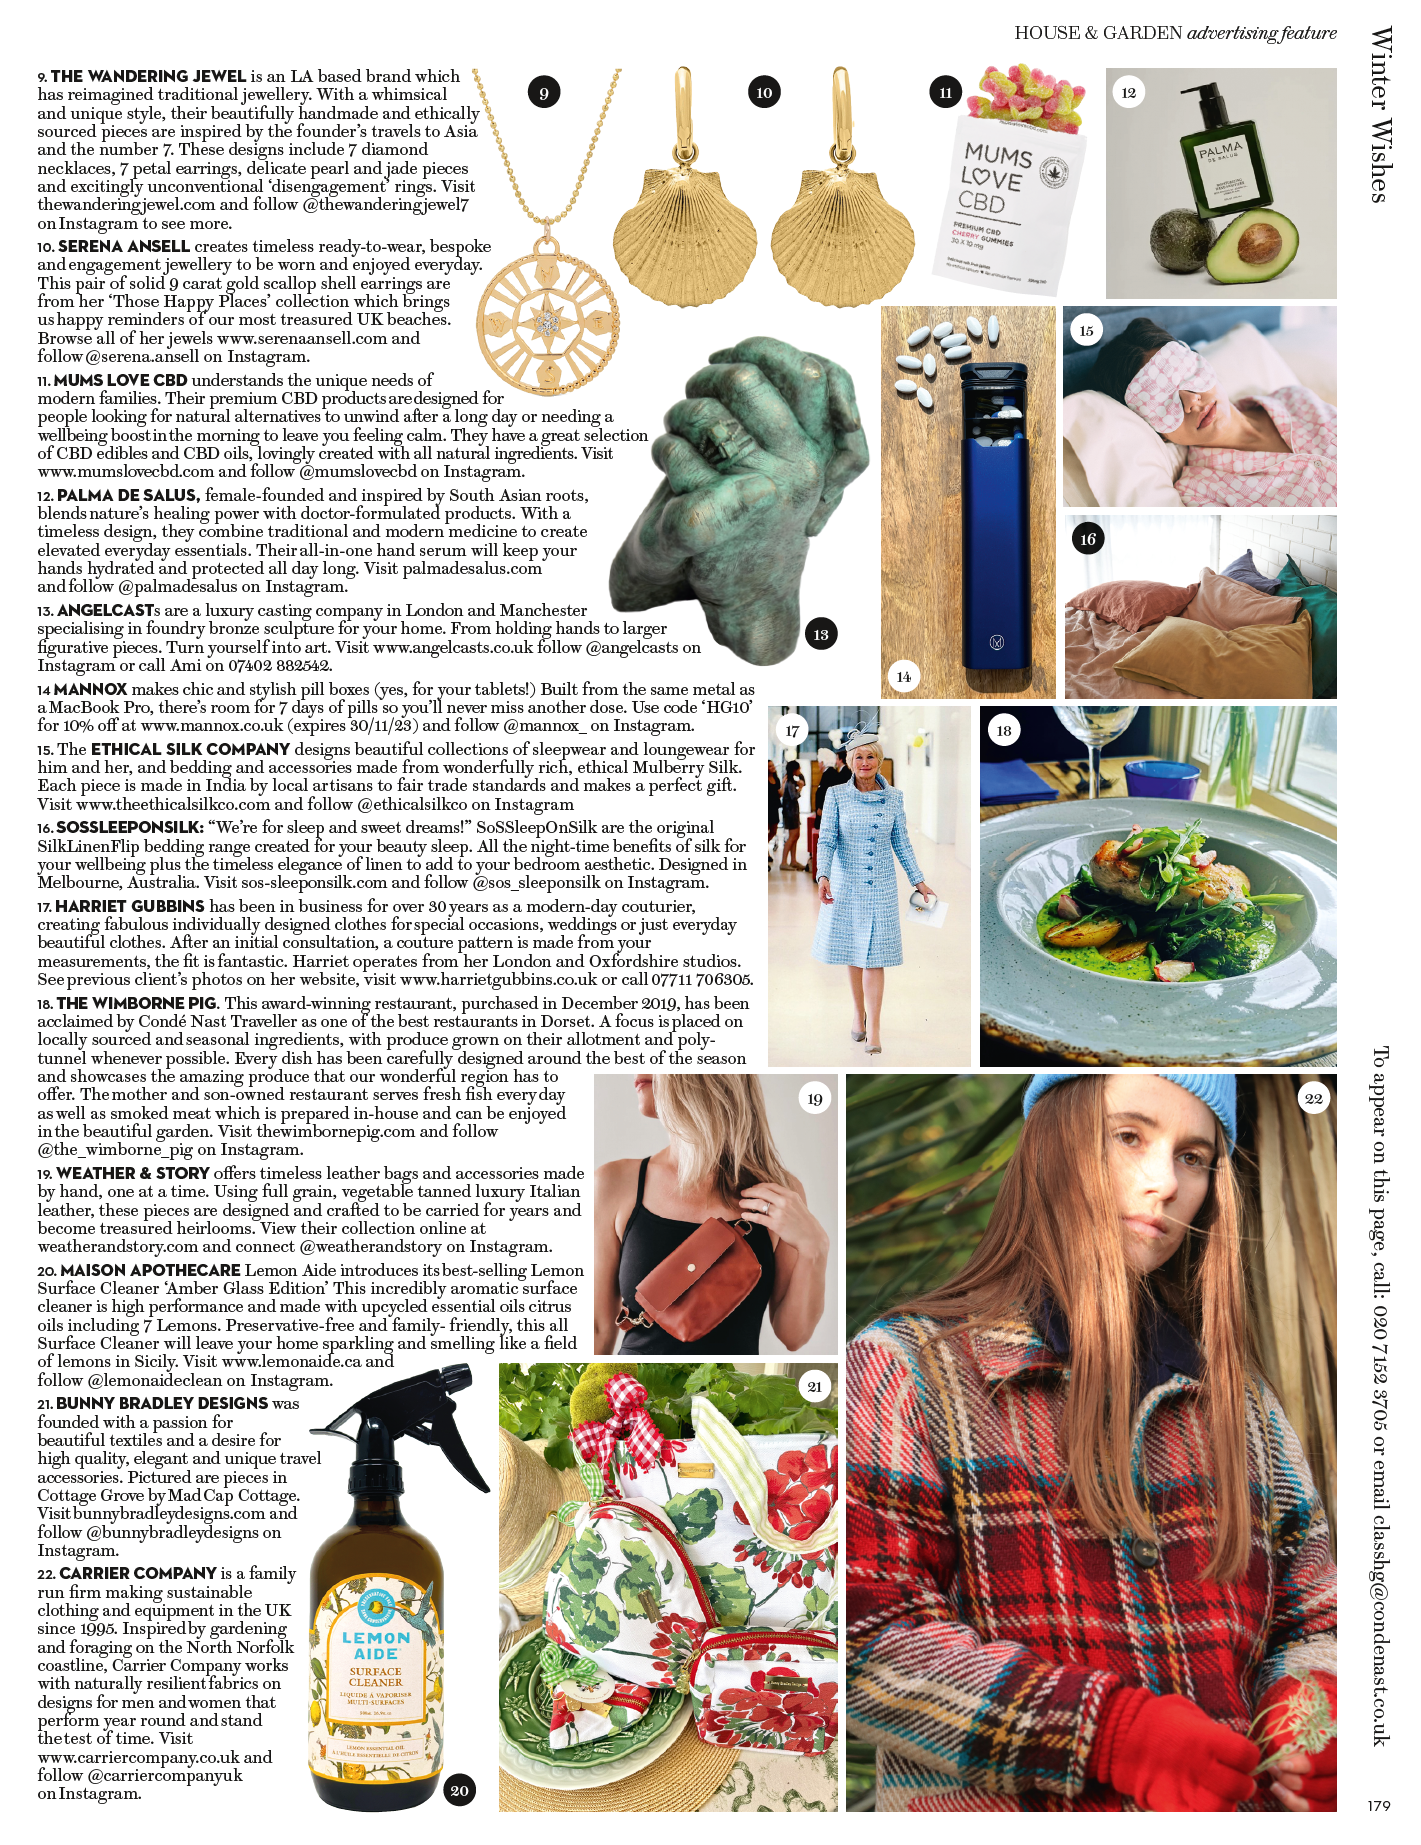 House & Garden magazine feature. Serena Ansell jewellery House & Garden. Scallop shell earrings. Those Happy Places. Solid gold shells. Shell jewellery. Serena Ansell jewellery.